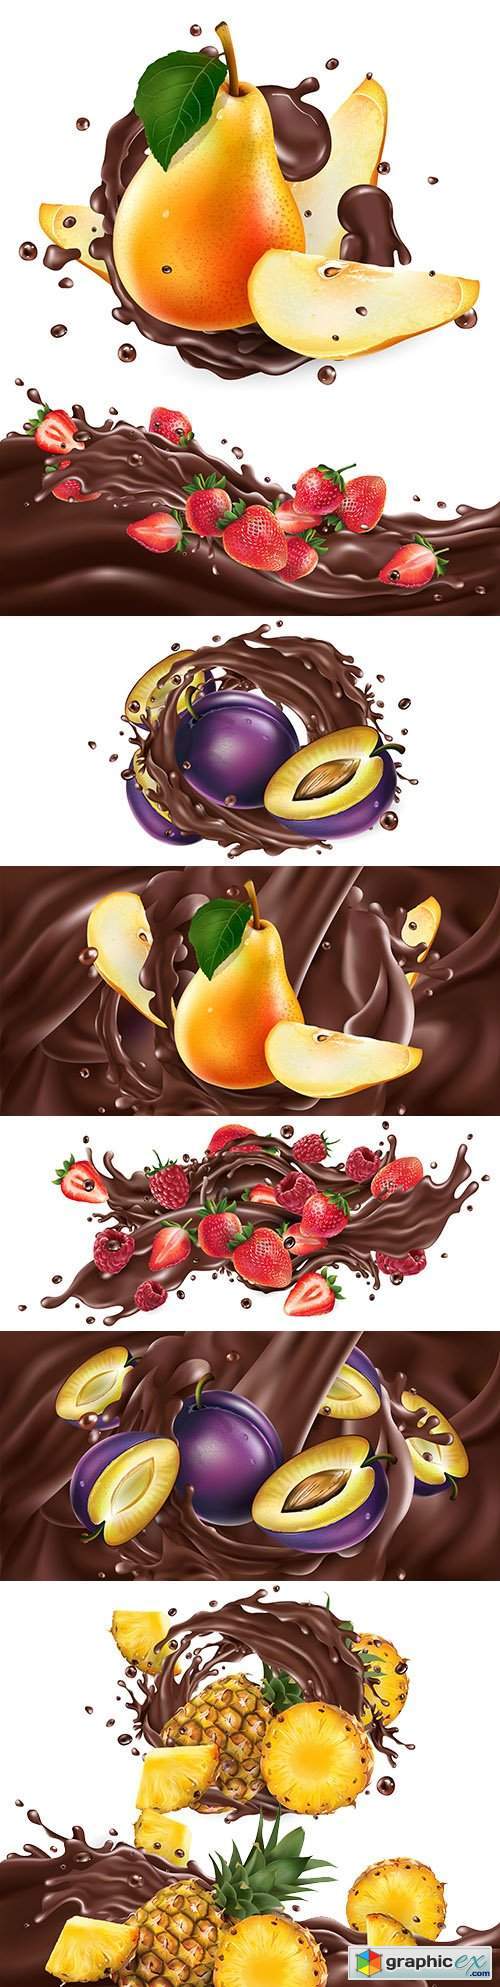 Whole and chopped fruit in chocolate splash realistic illustrations